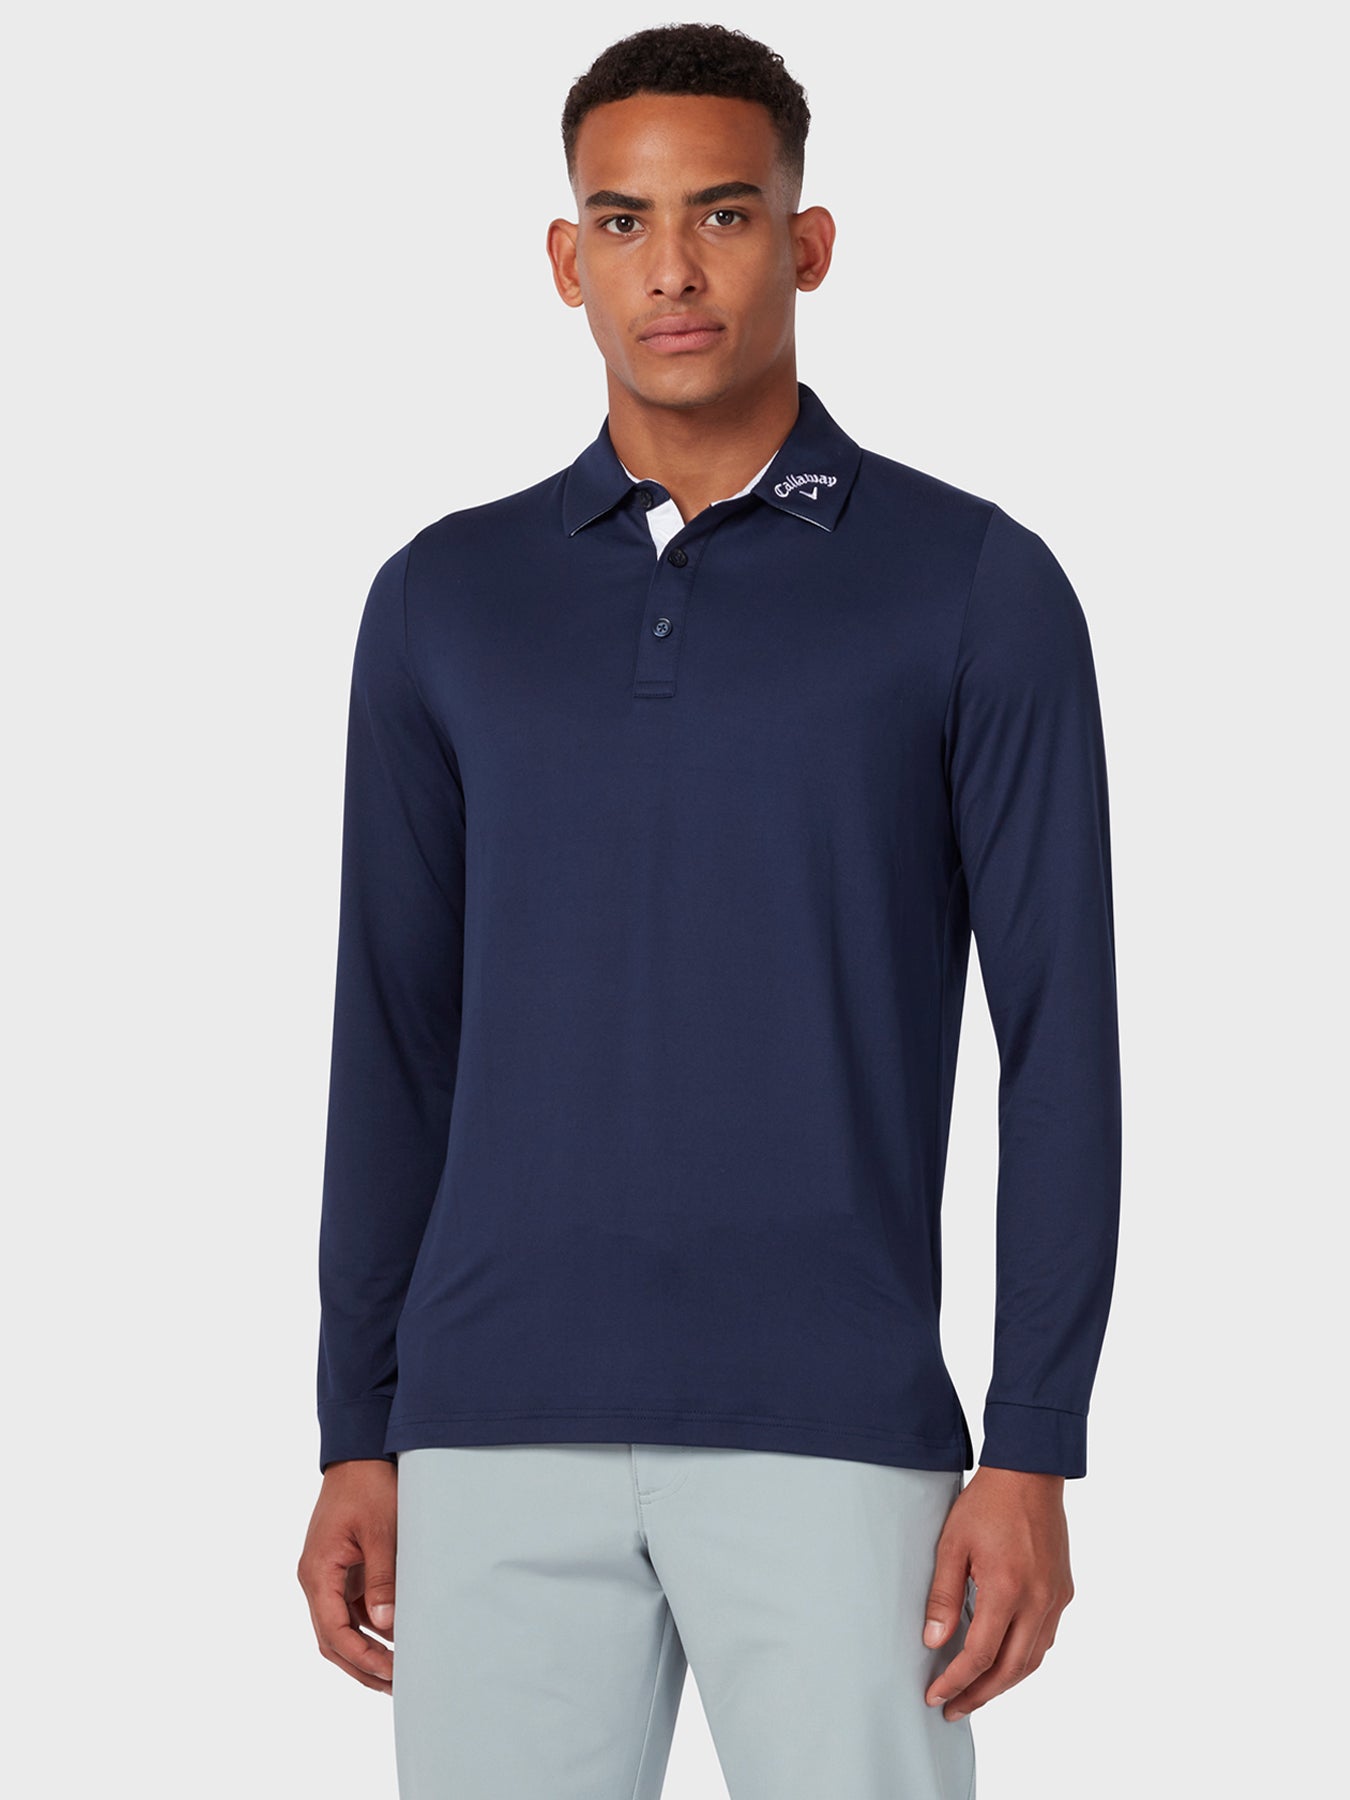 View Long Sleeve Performance Polo In Peacoat Peacoat L information